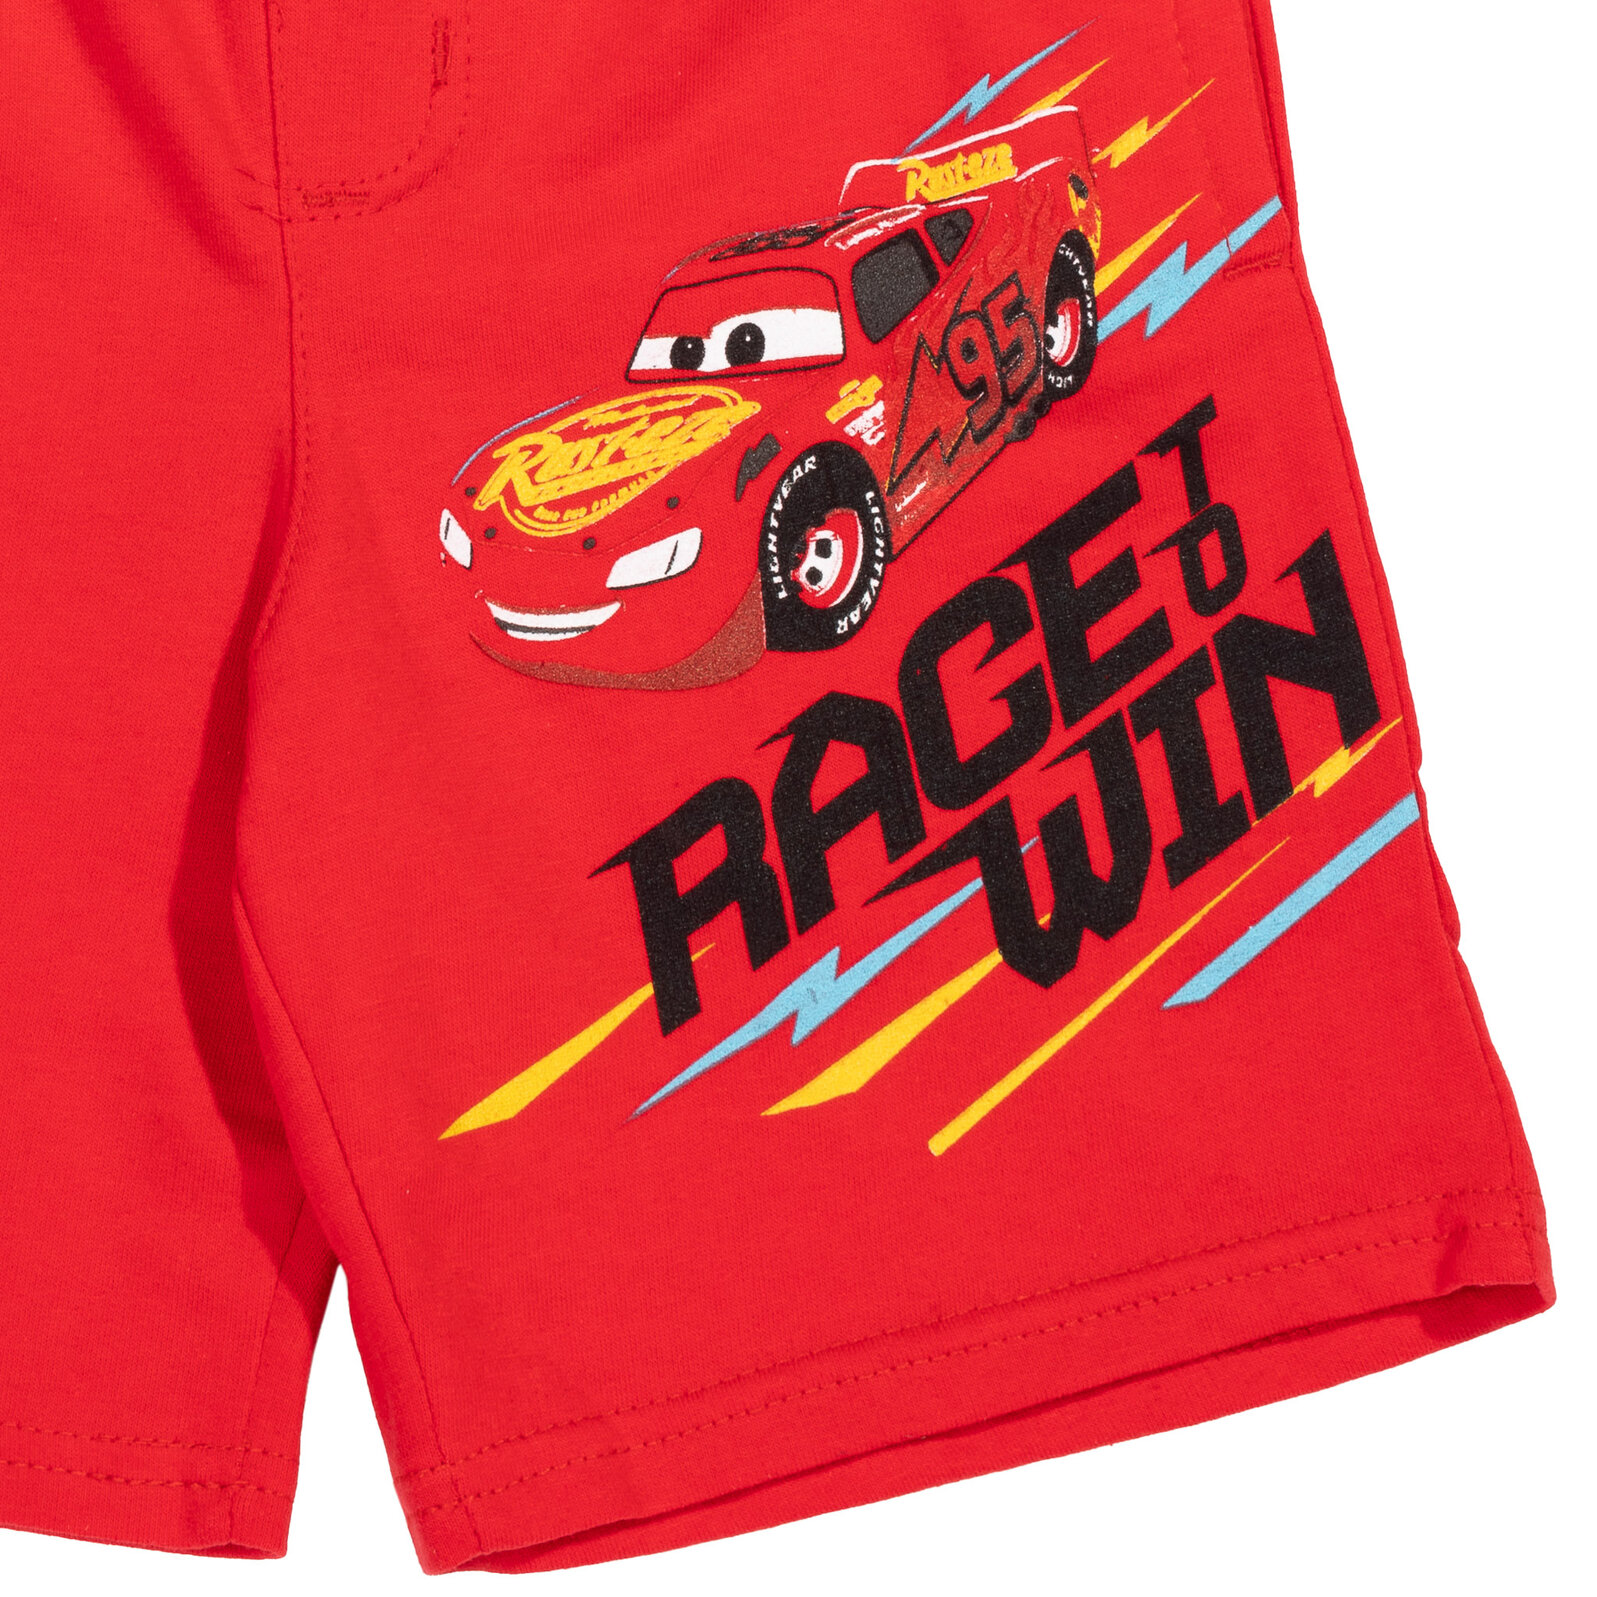 Disney Pixar Cars Lightning McQueen Toddler Boys French Terry 2 Pack Shorts Toddler to Little Kid - image 4 of 5